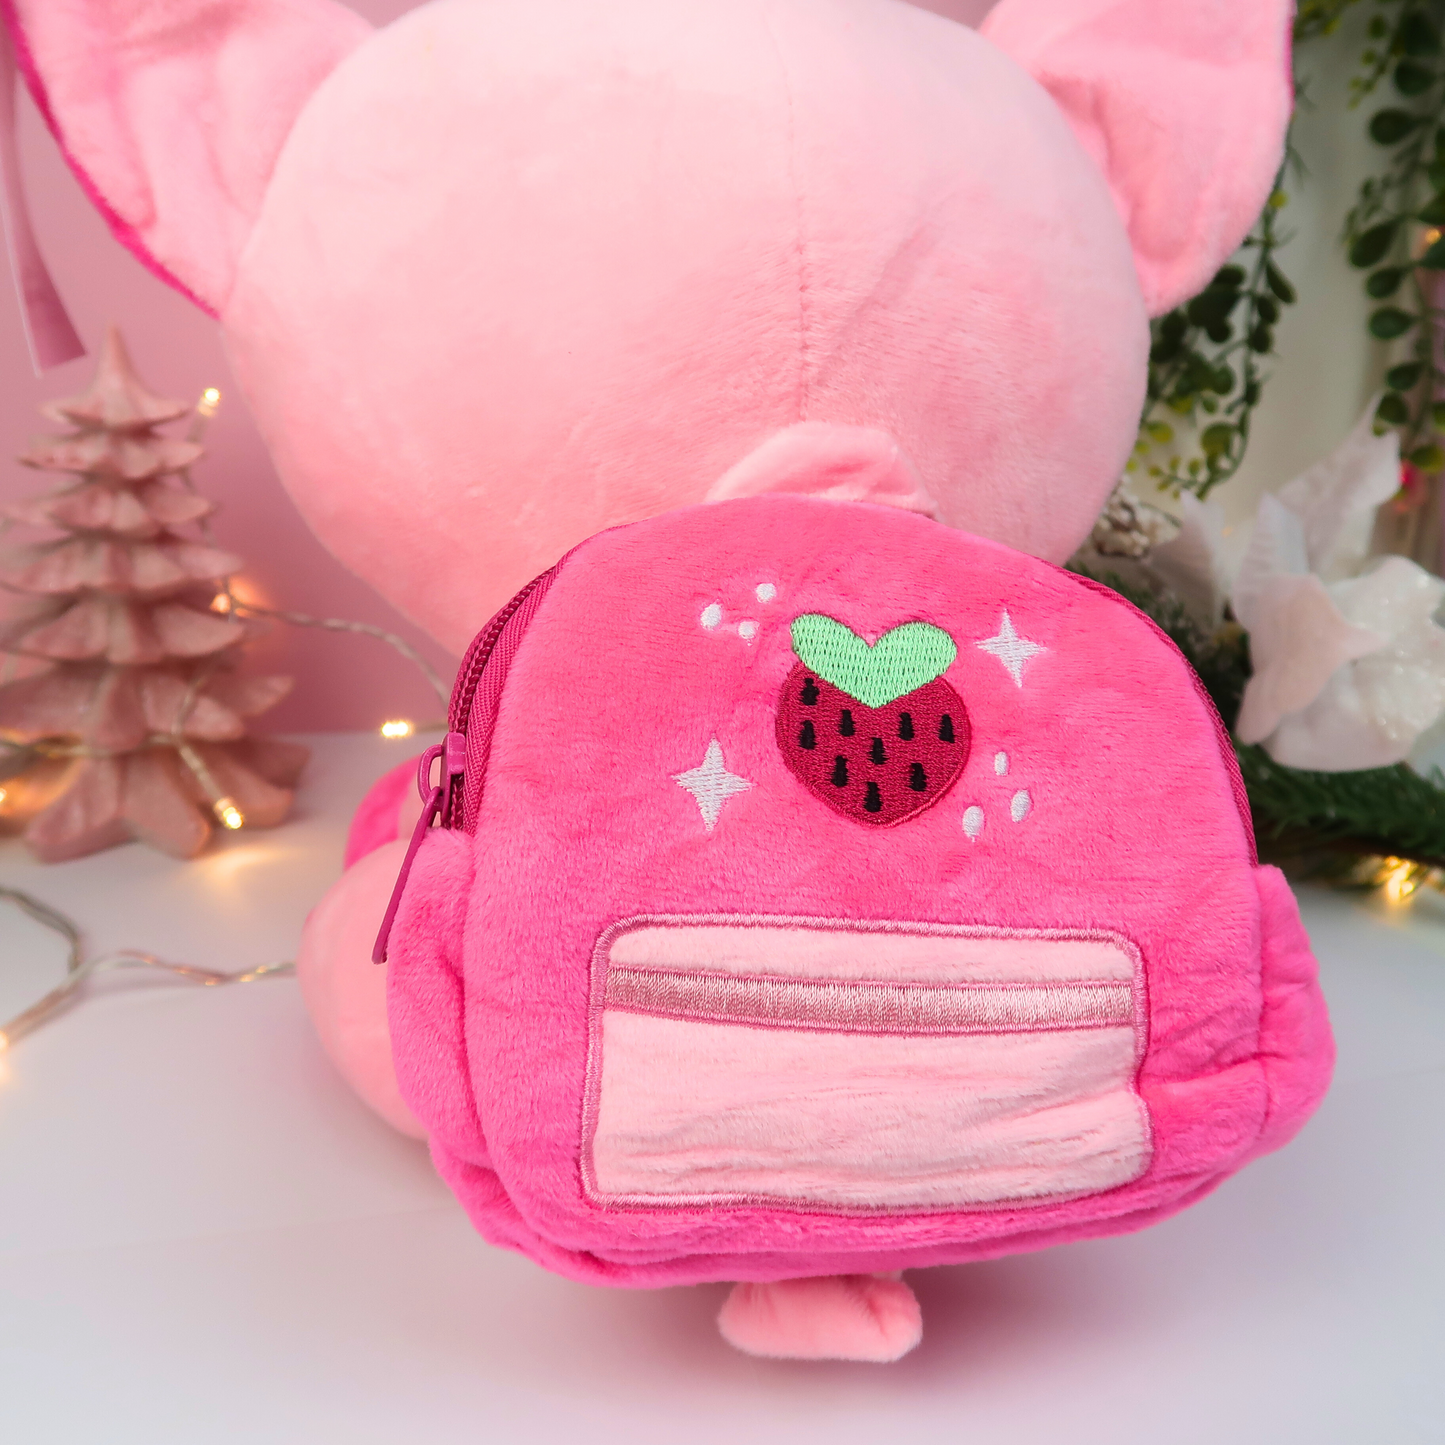 Nora's strawberry backpack